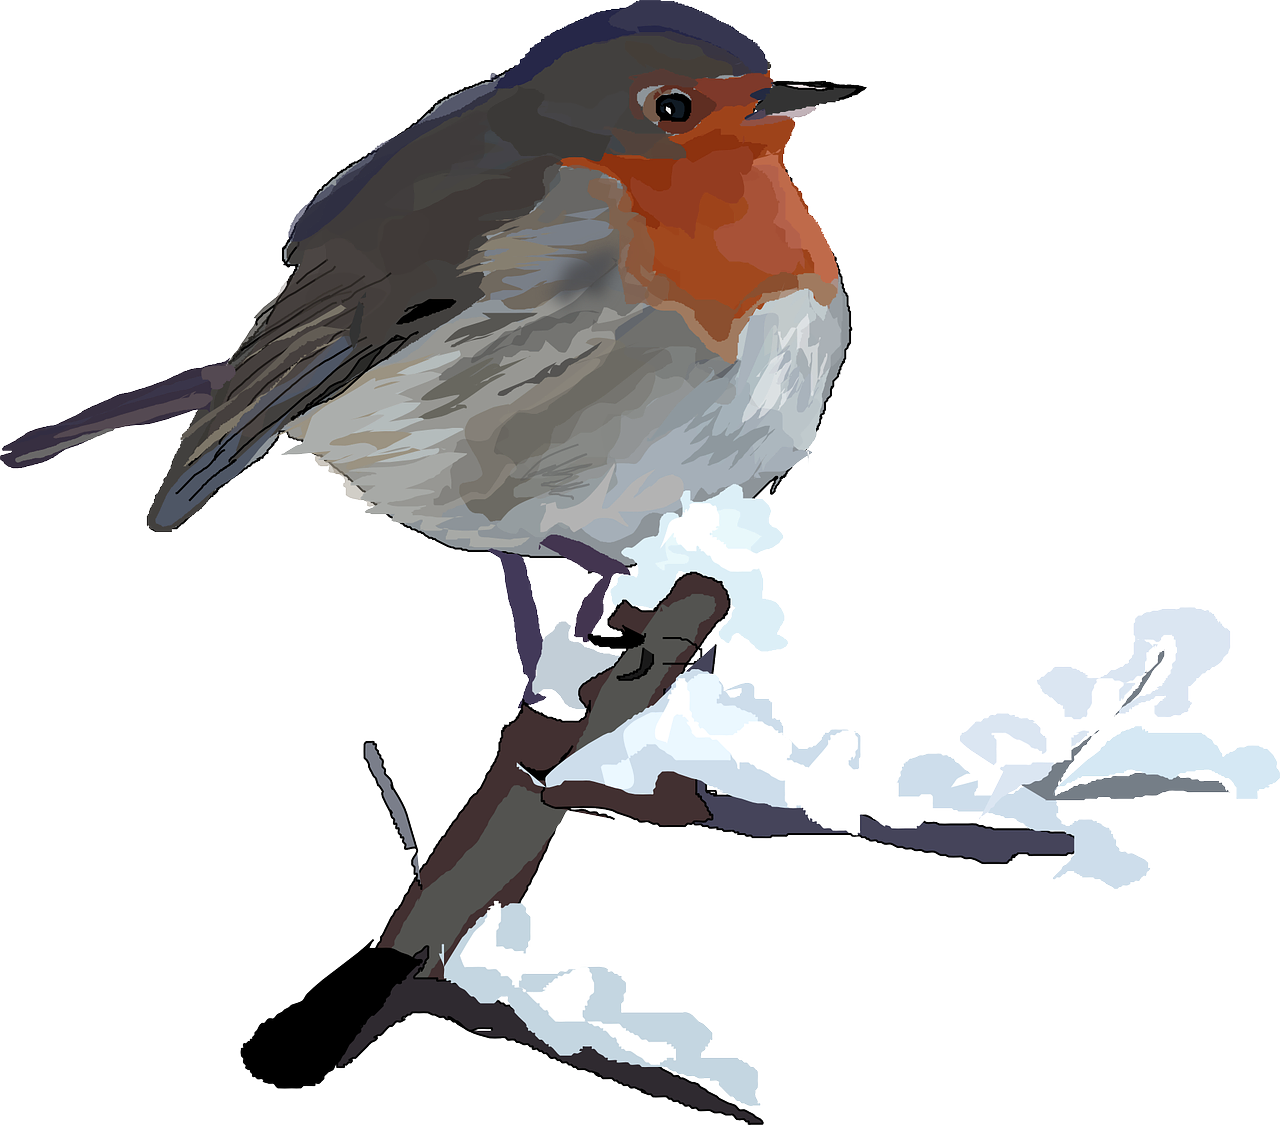 A resident Robin singing regardless of who listens